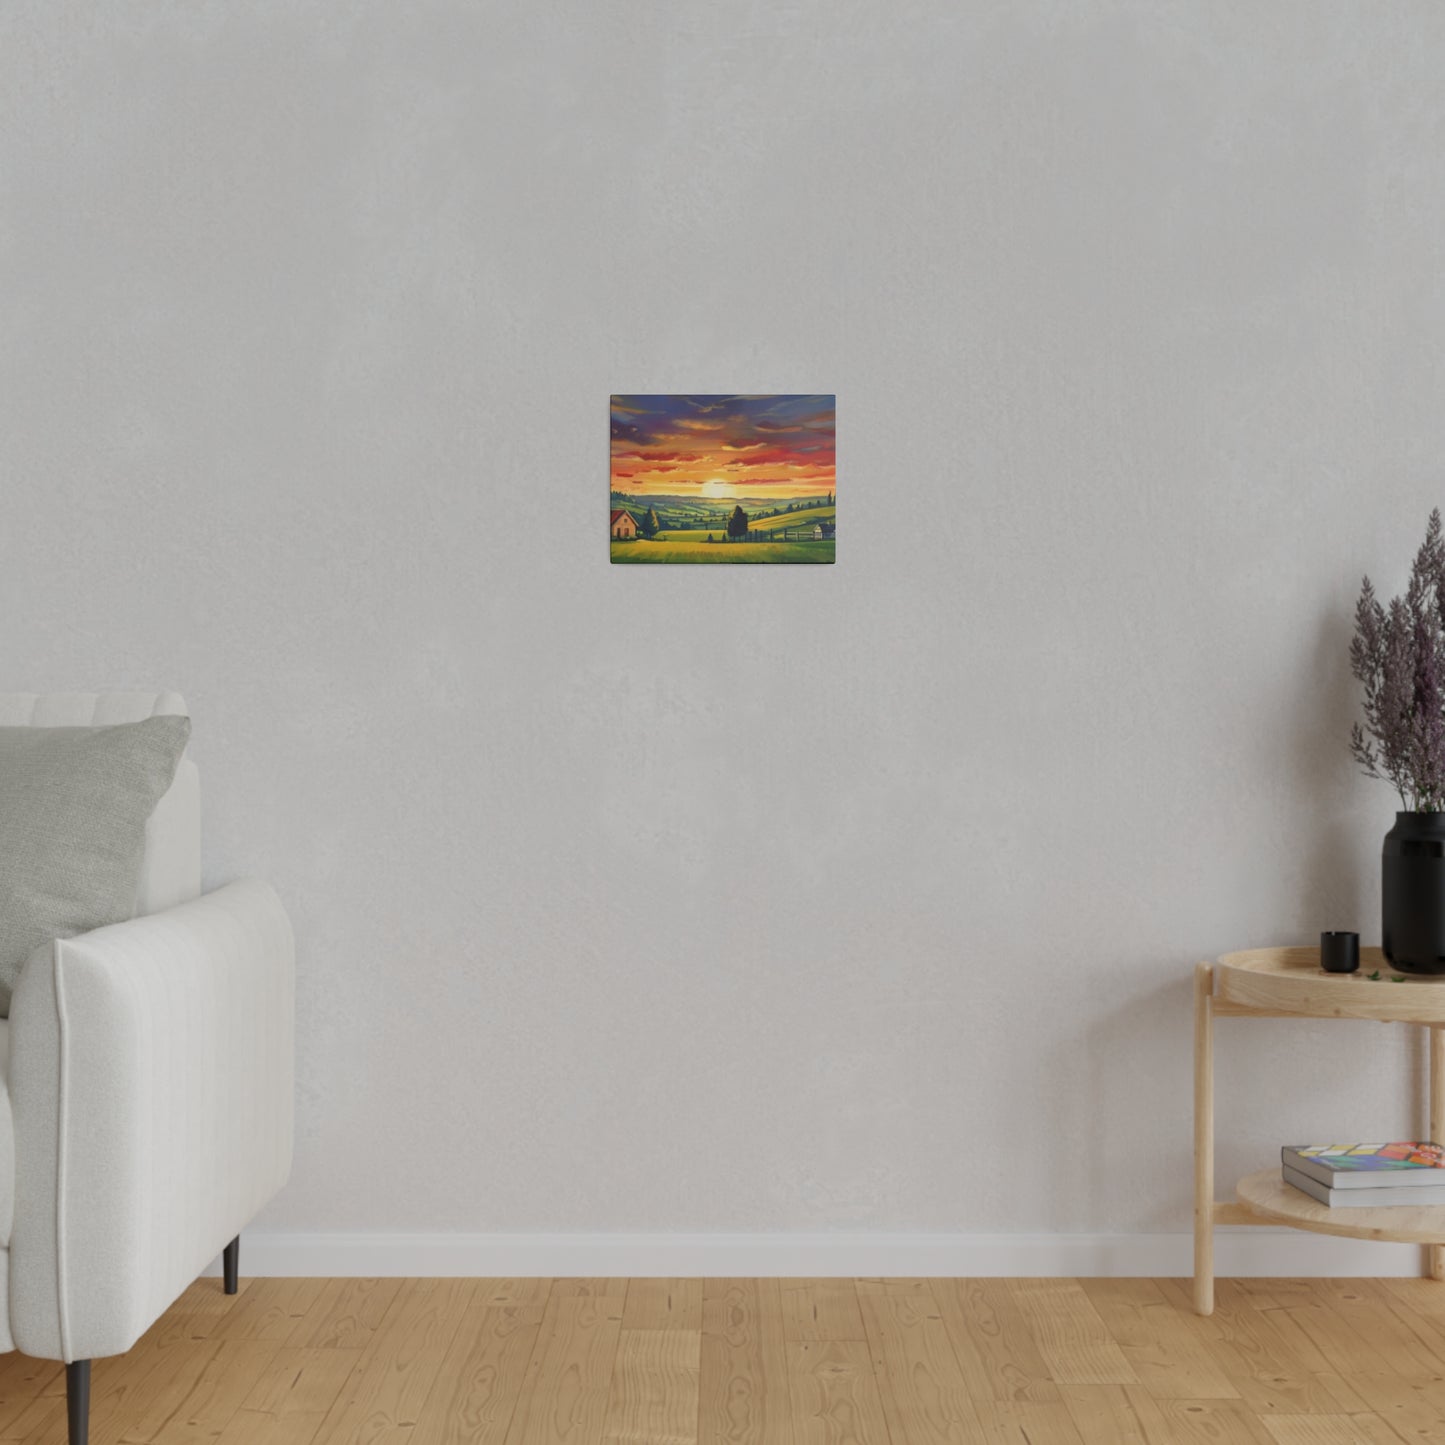 Sunset Over Countryside - Matte Canvas, Stretched, 0.75"